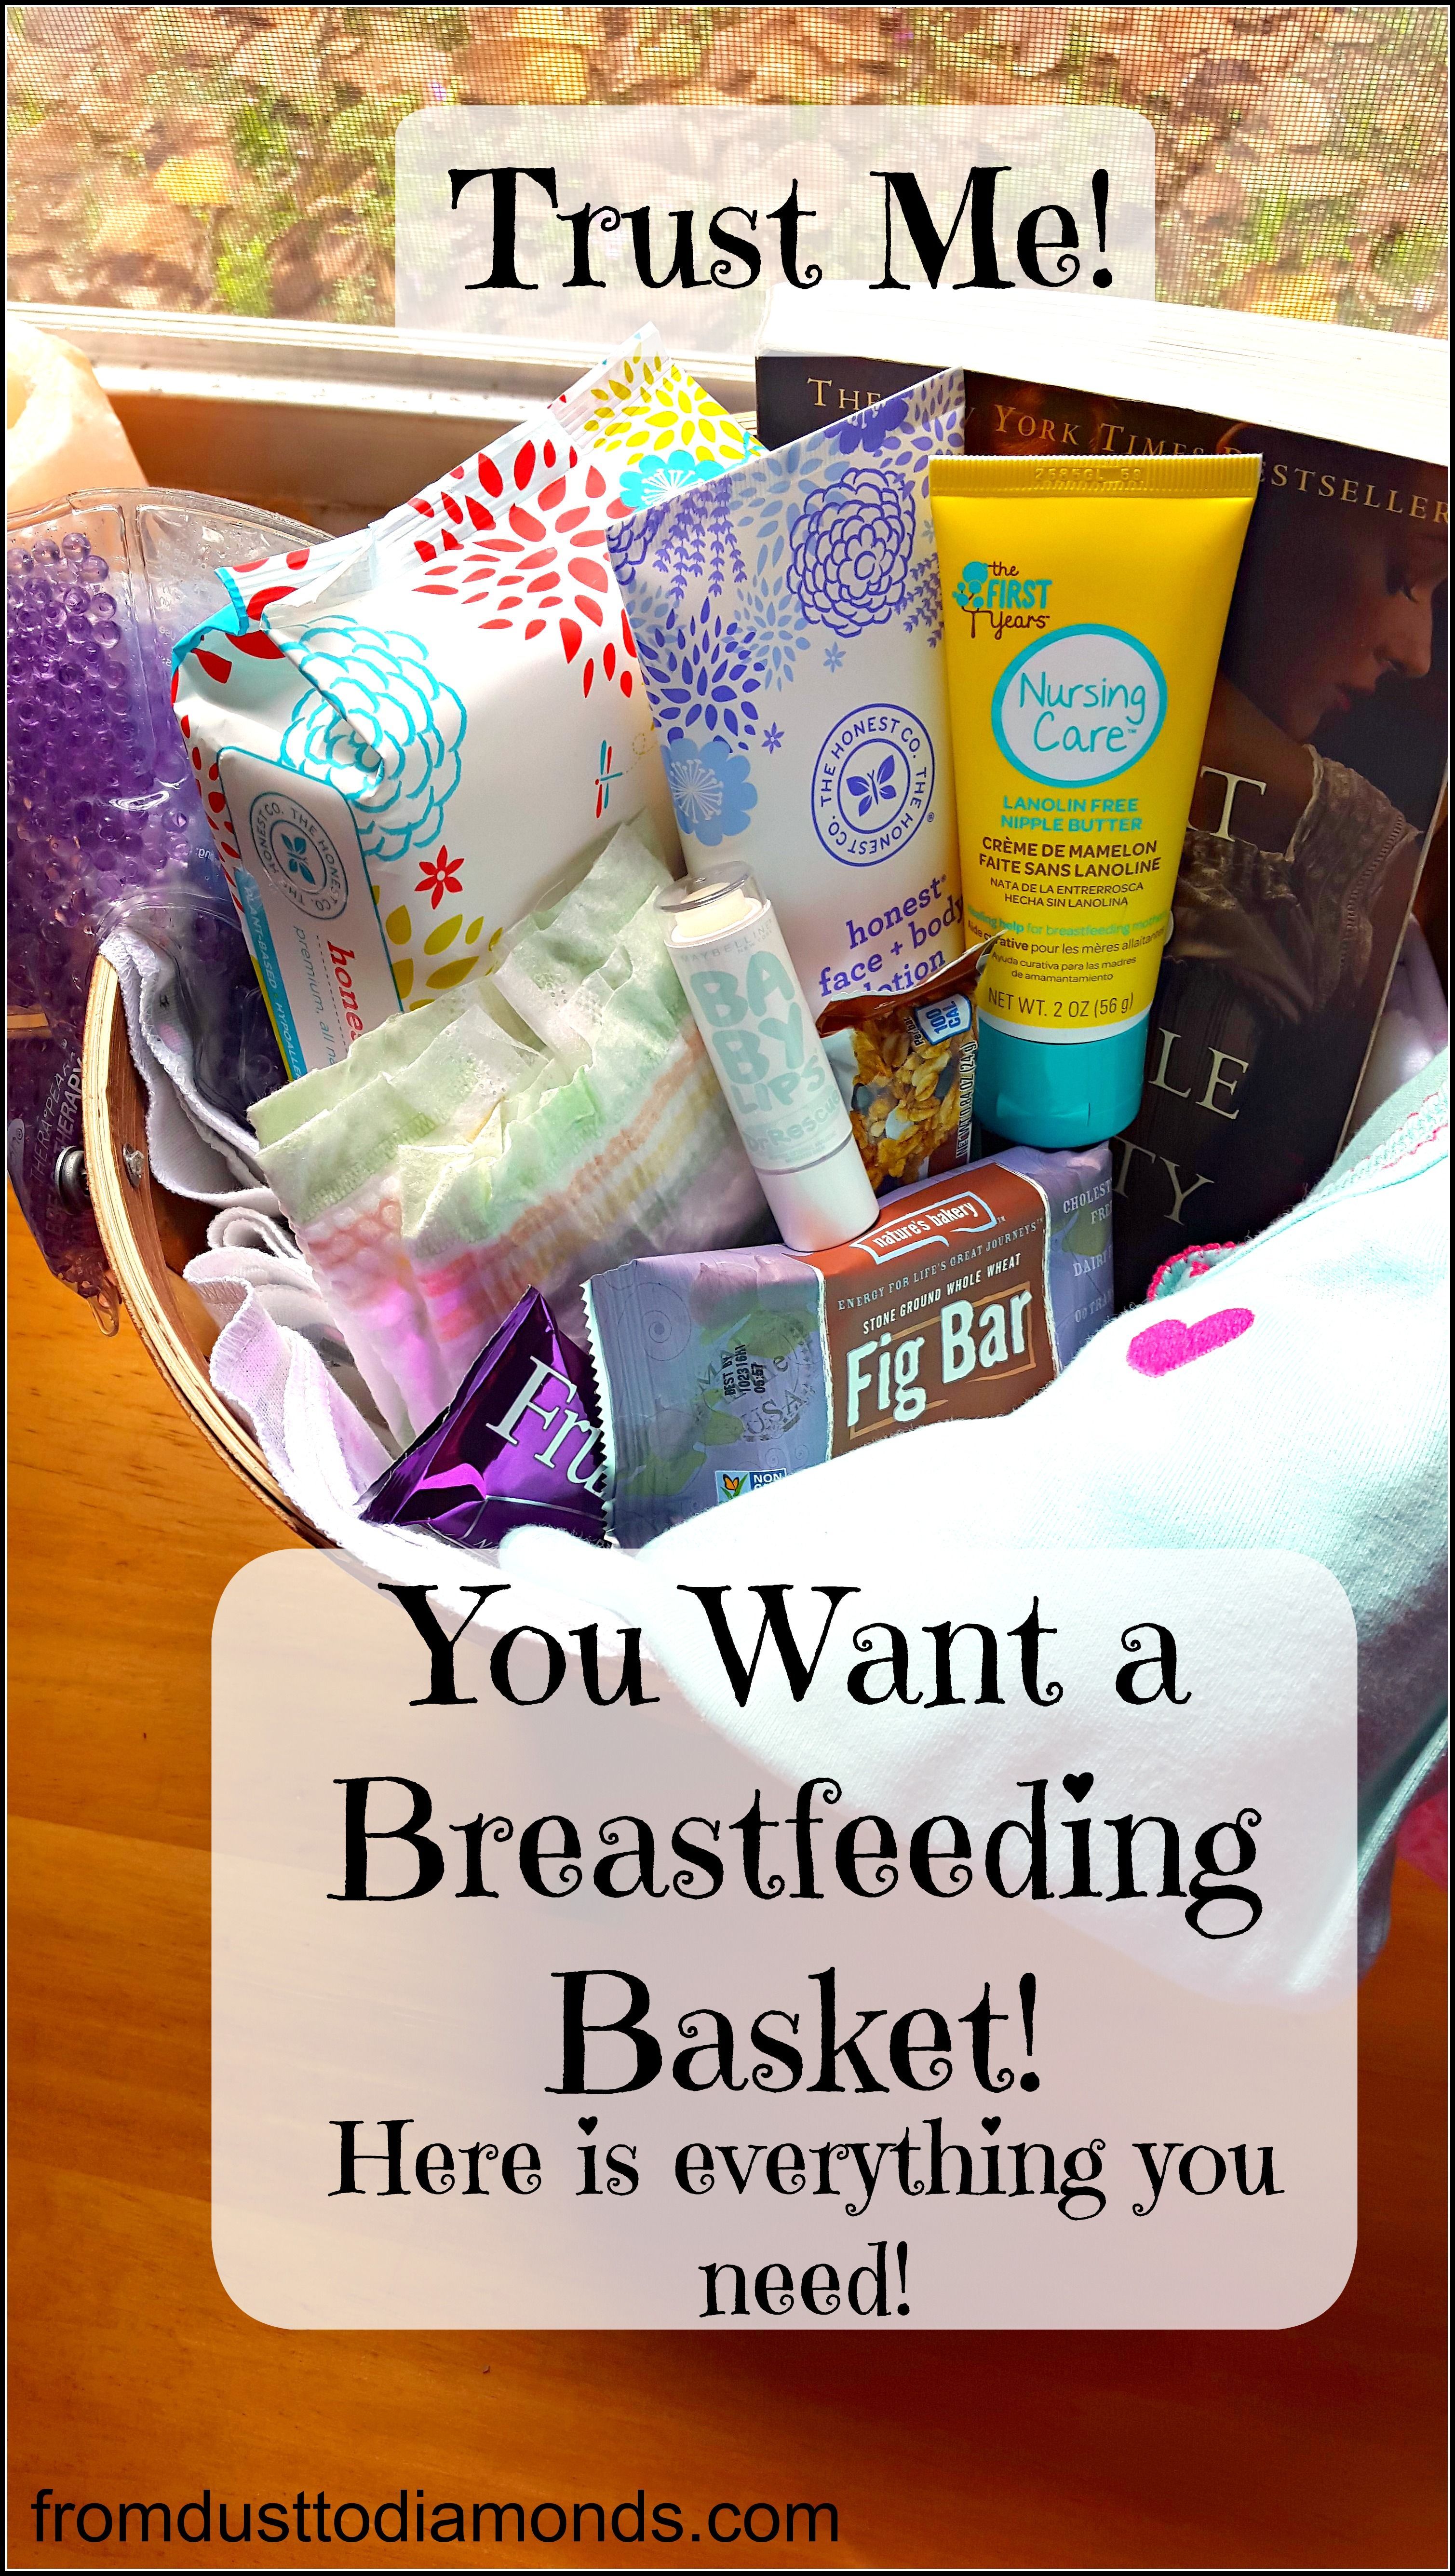 Trust me, you want a breastfeeding basket and here is everything you need in it. Once you are breastfeedin